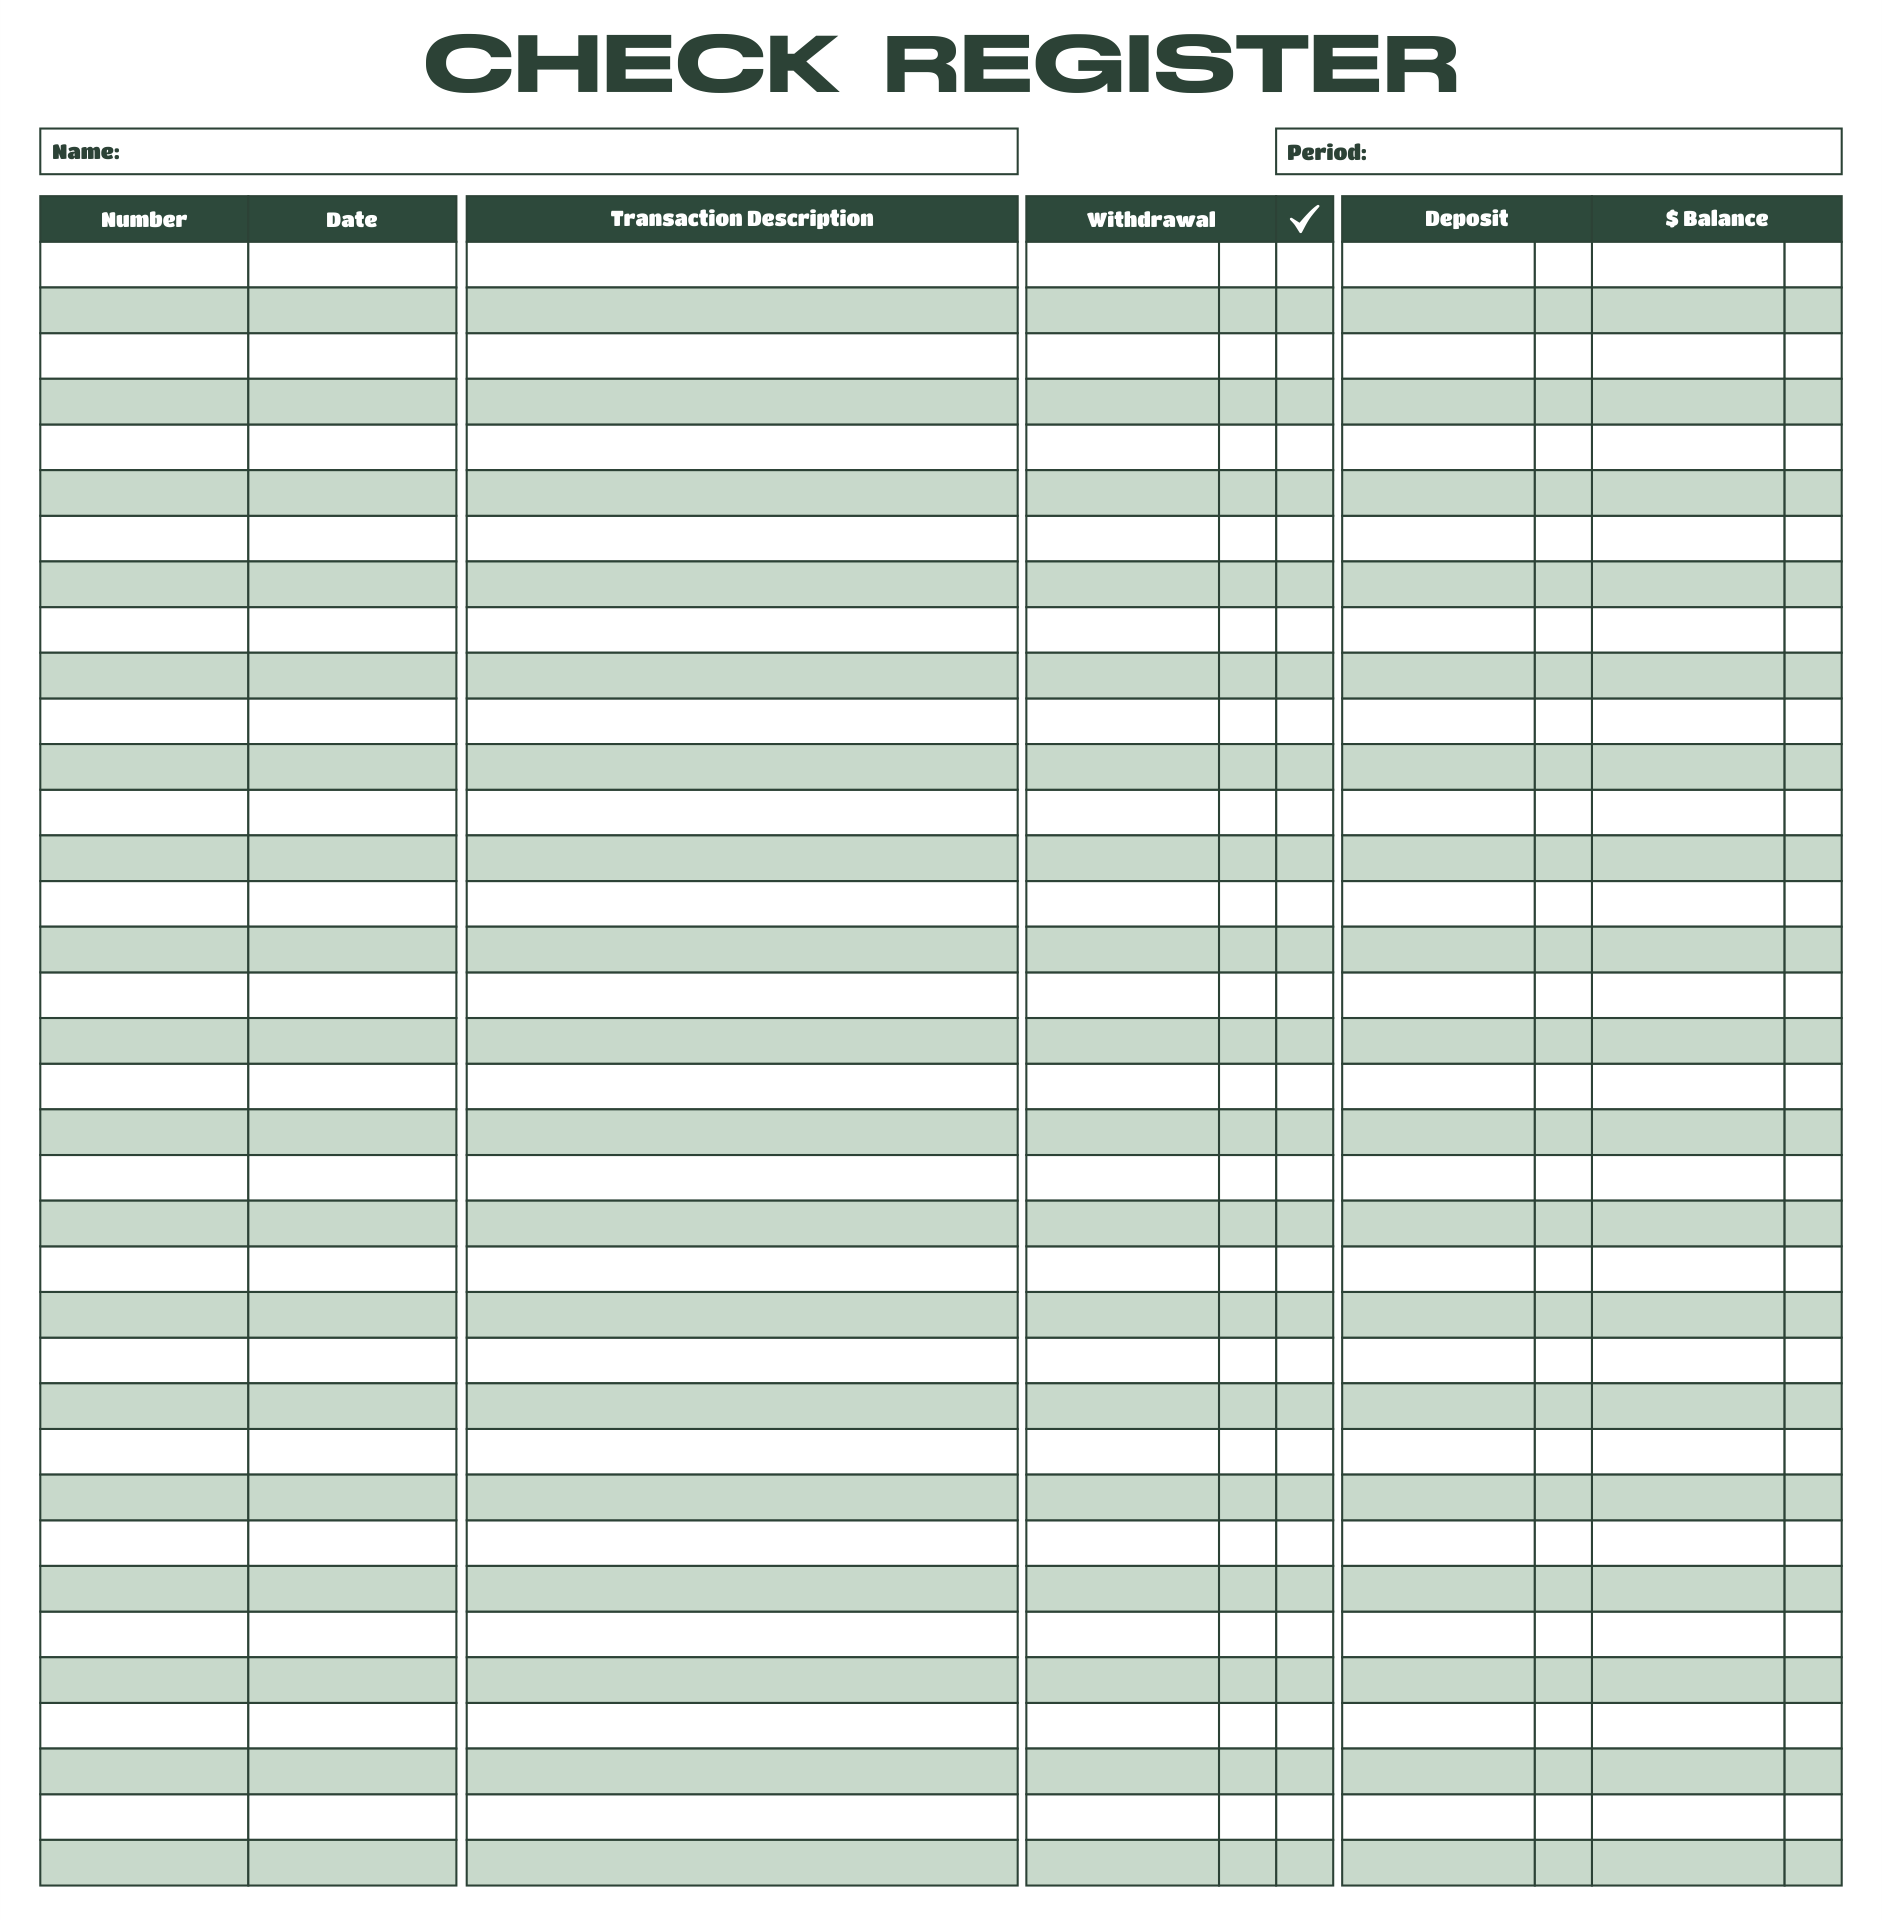 Printable Check Registers Template